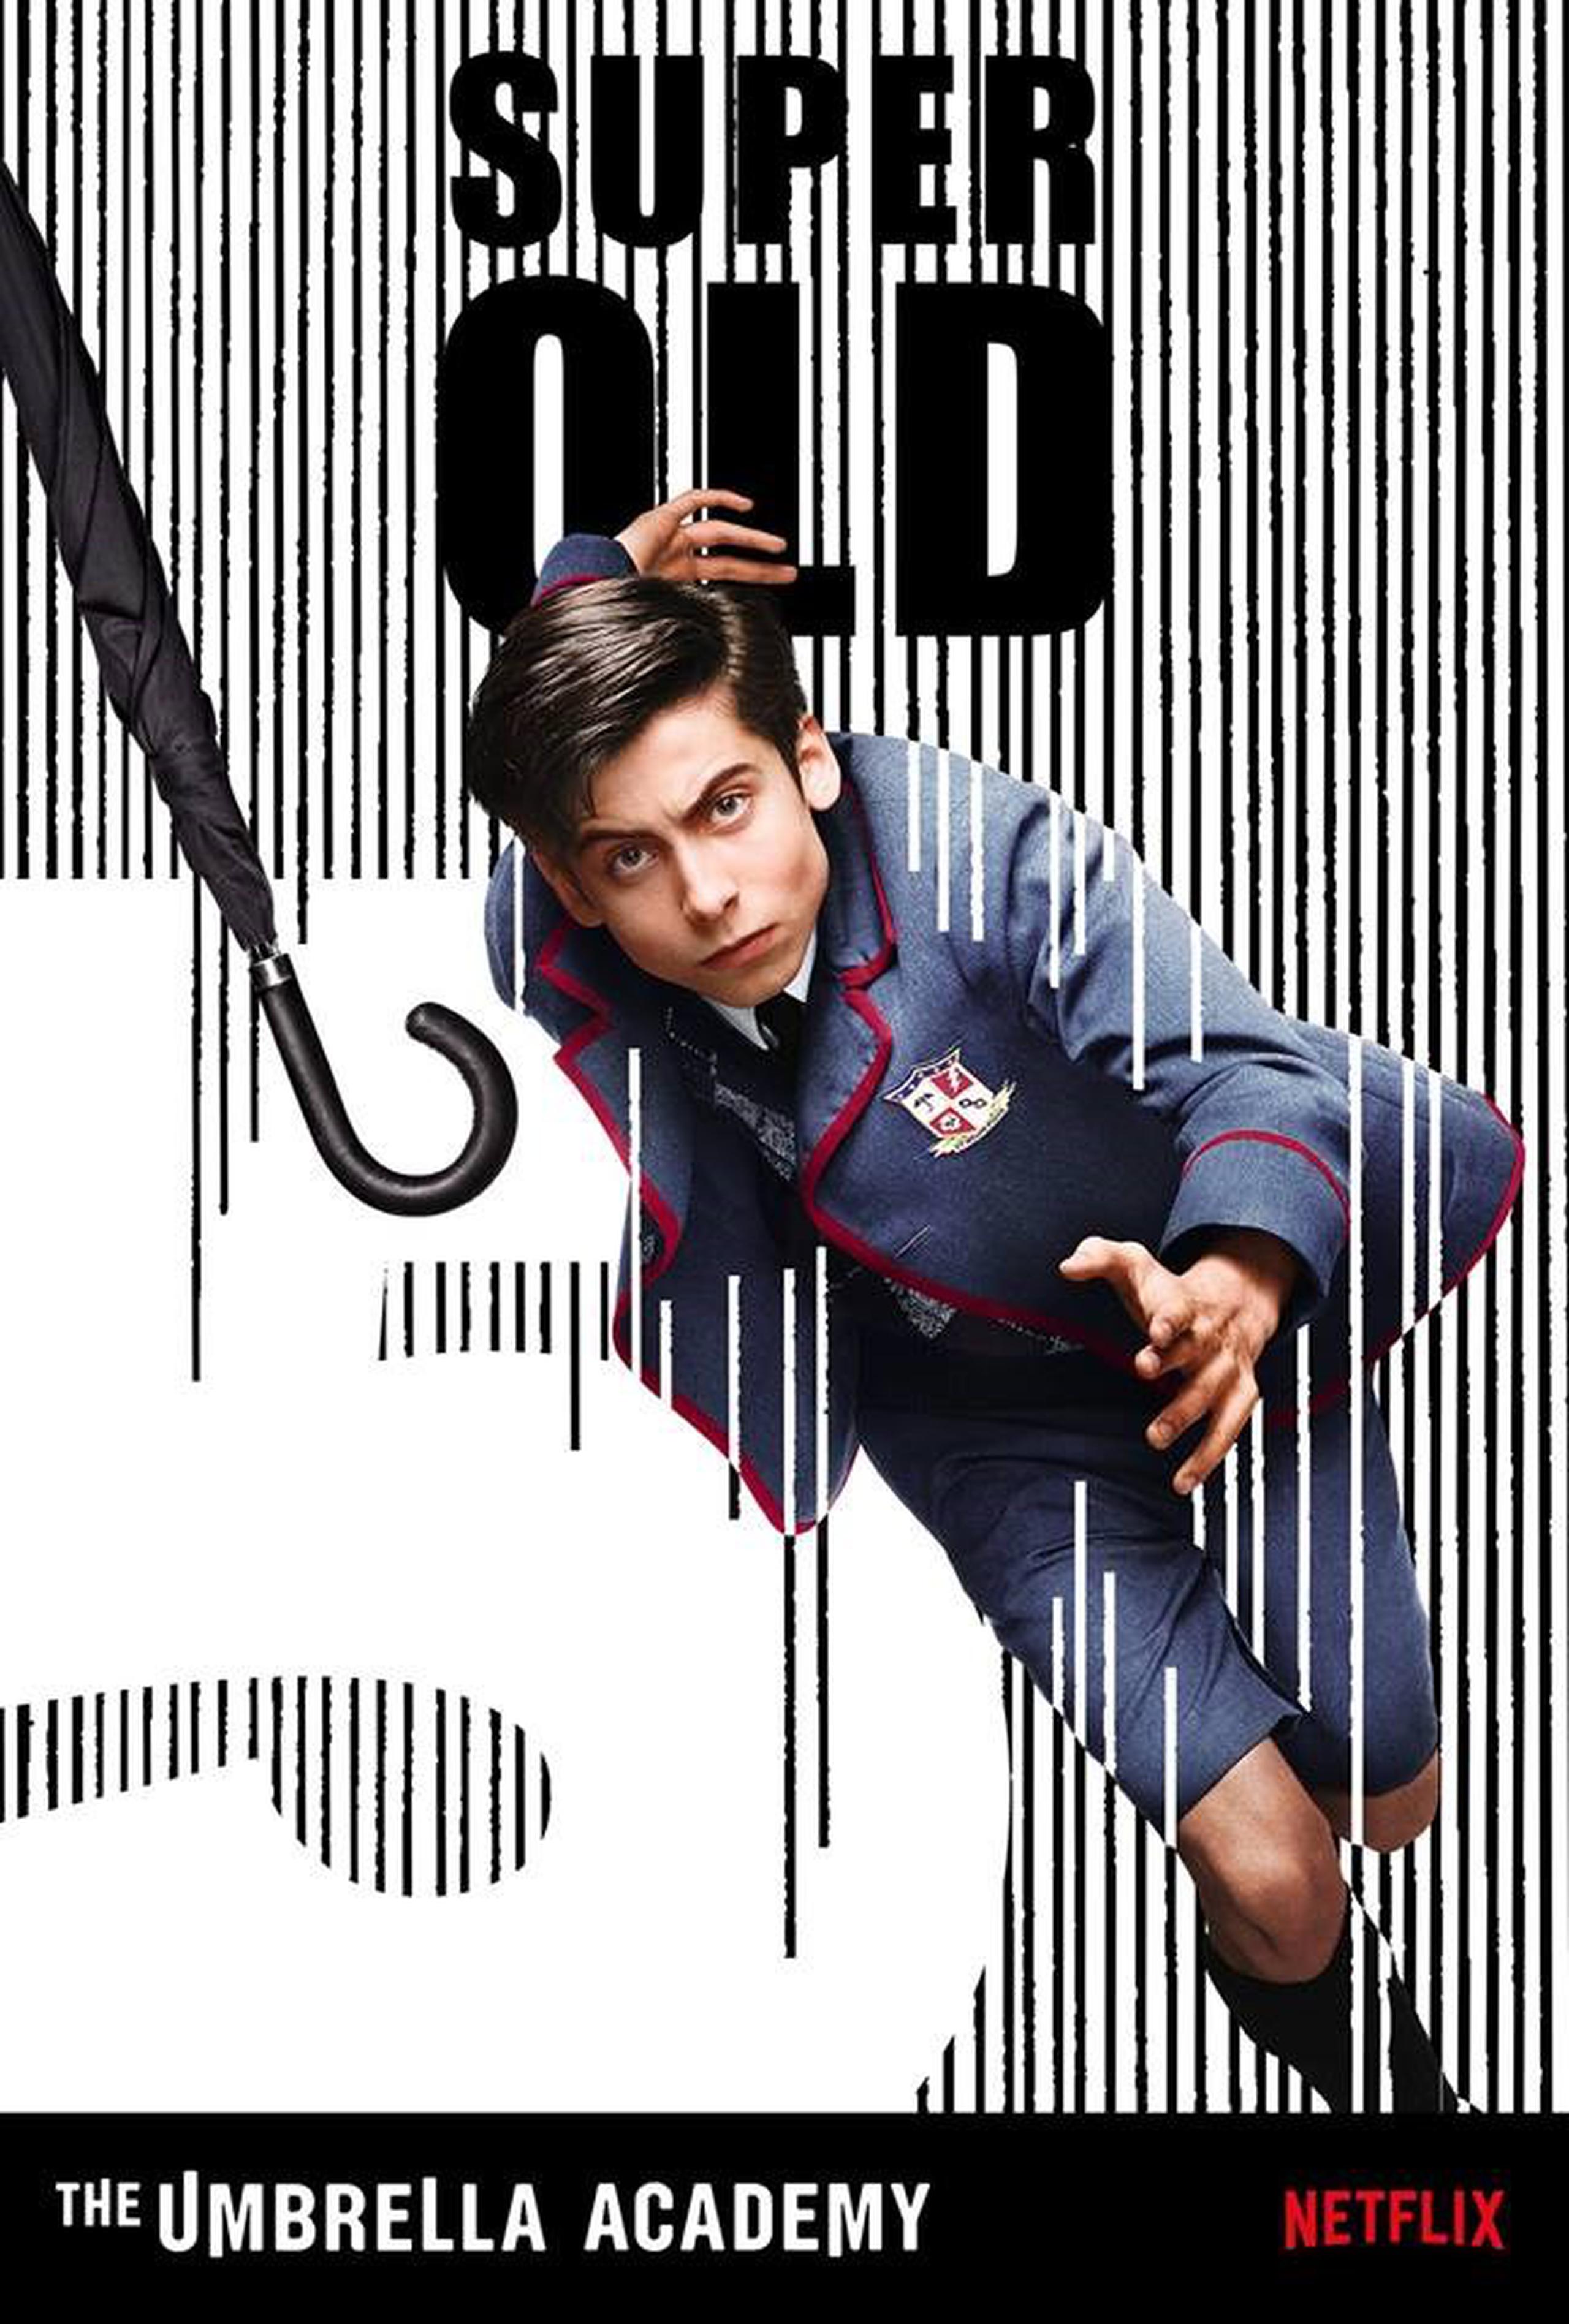 Aidan Gallagher – Number Five / The Boy. (Facebook)